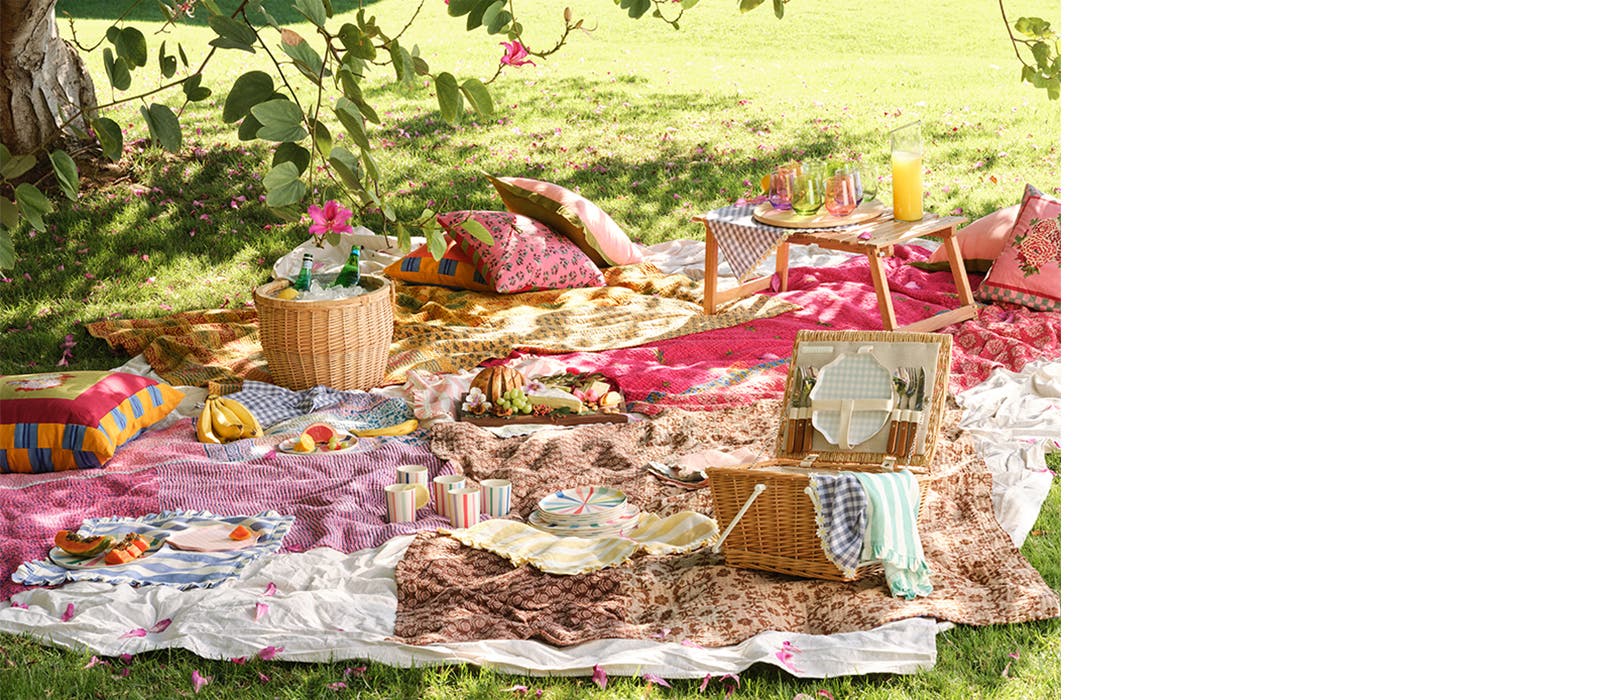 A picnic in the grass with colorful blankets, tablecloths, pillows, tableware and more.